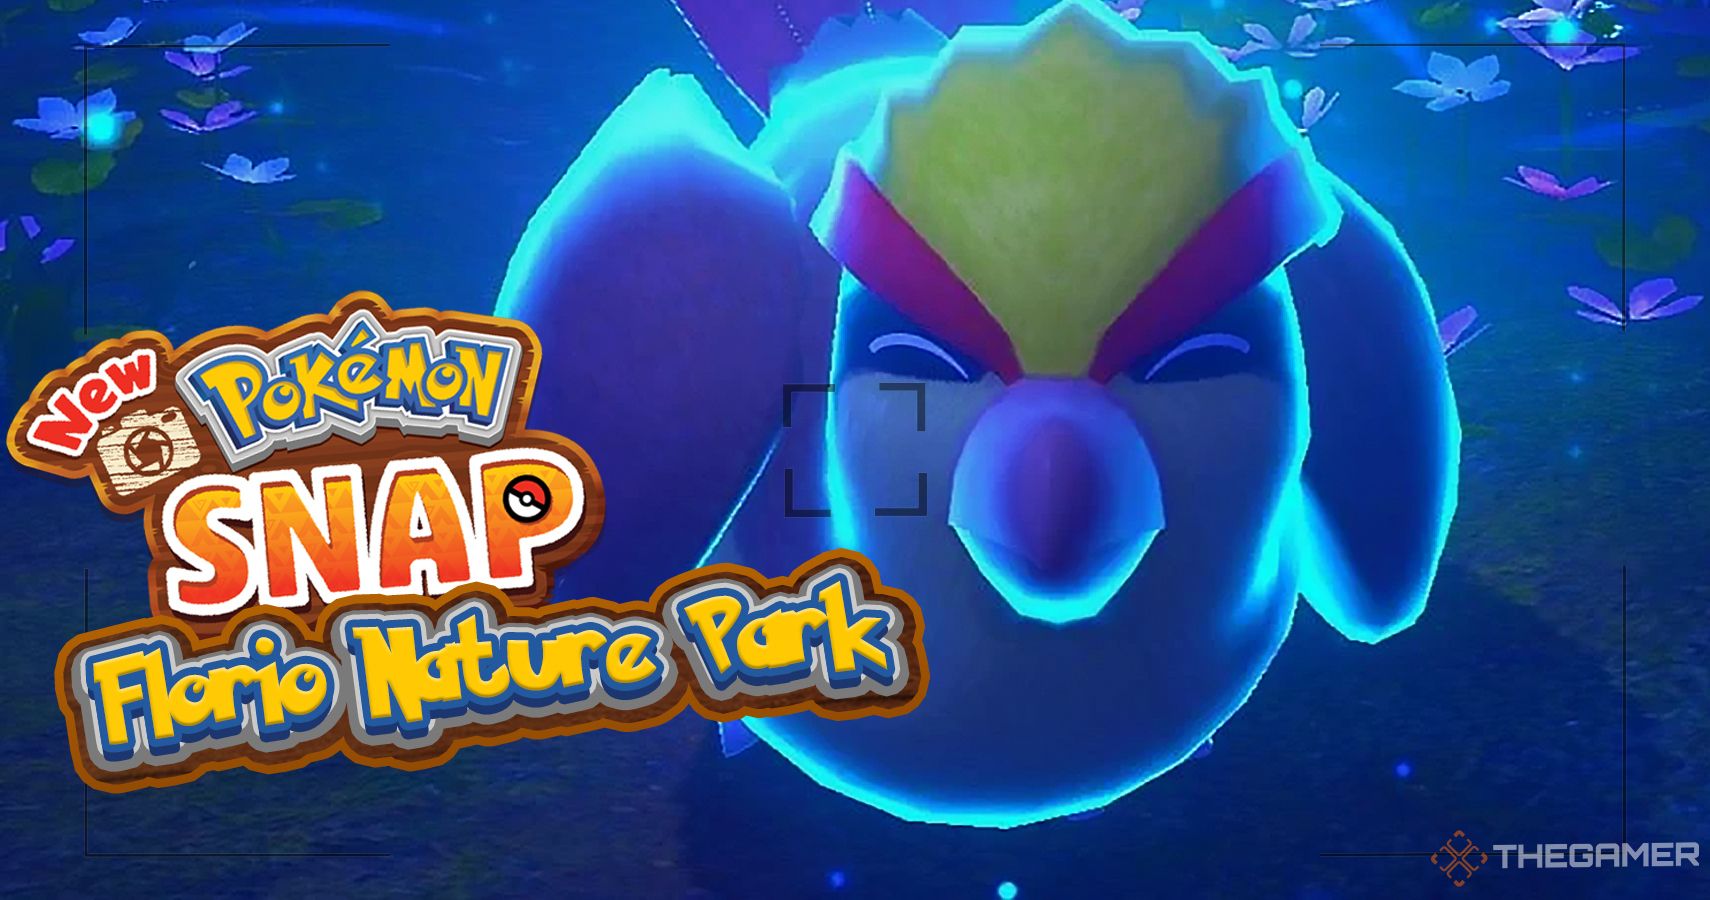 New Pokemon Snap How To Unlock All Ranks In Florio Nature Park